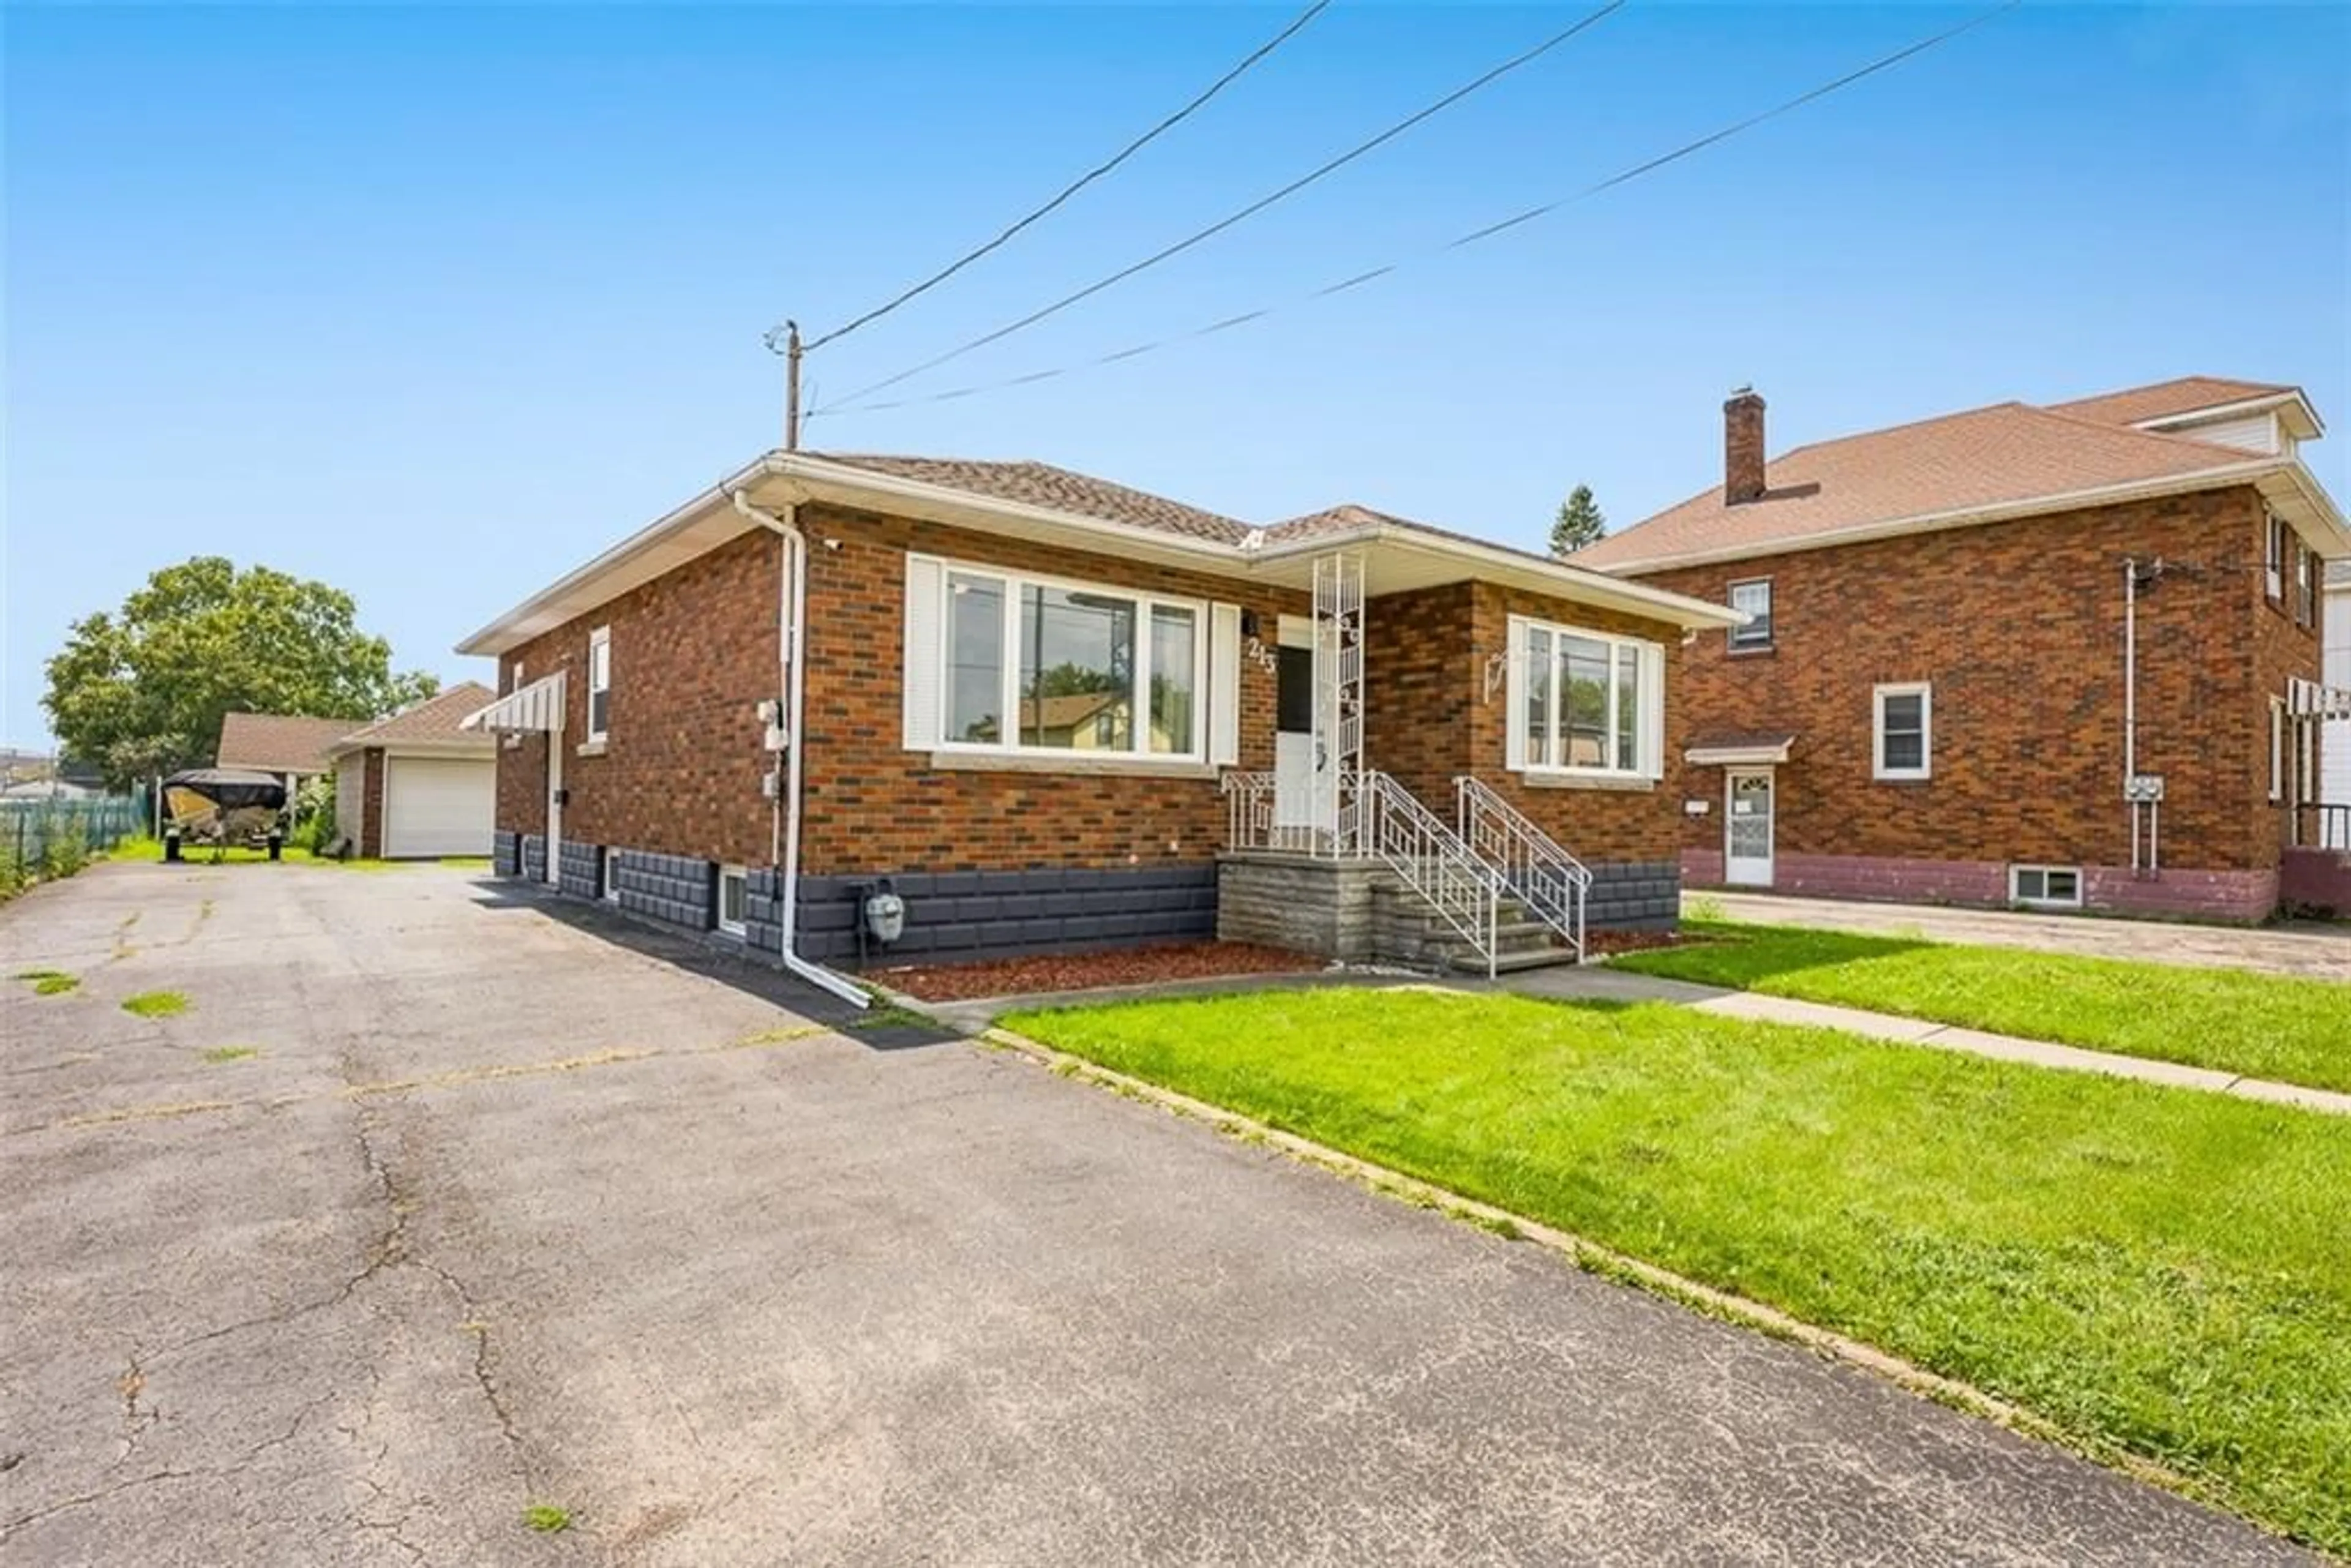 Home with brick exterior material for 213 Bell St, Port Colborne Ontario L3K 1J2